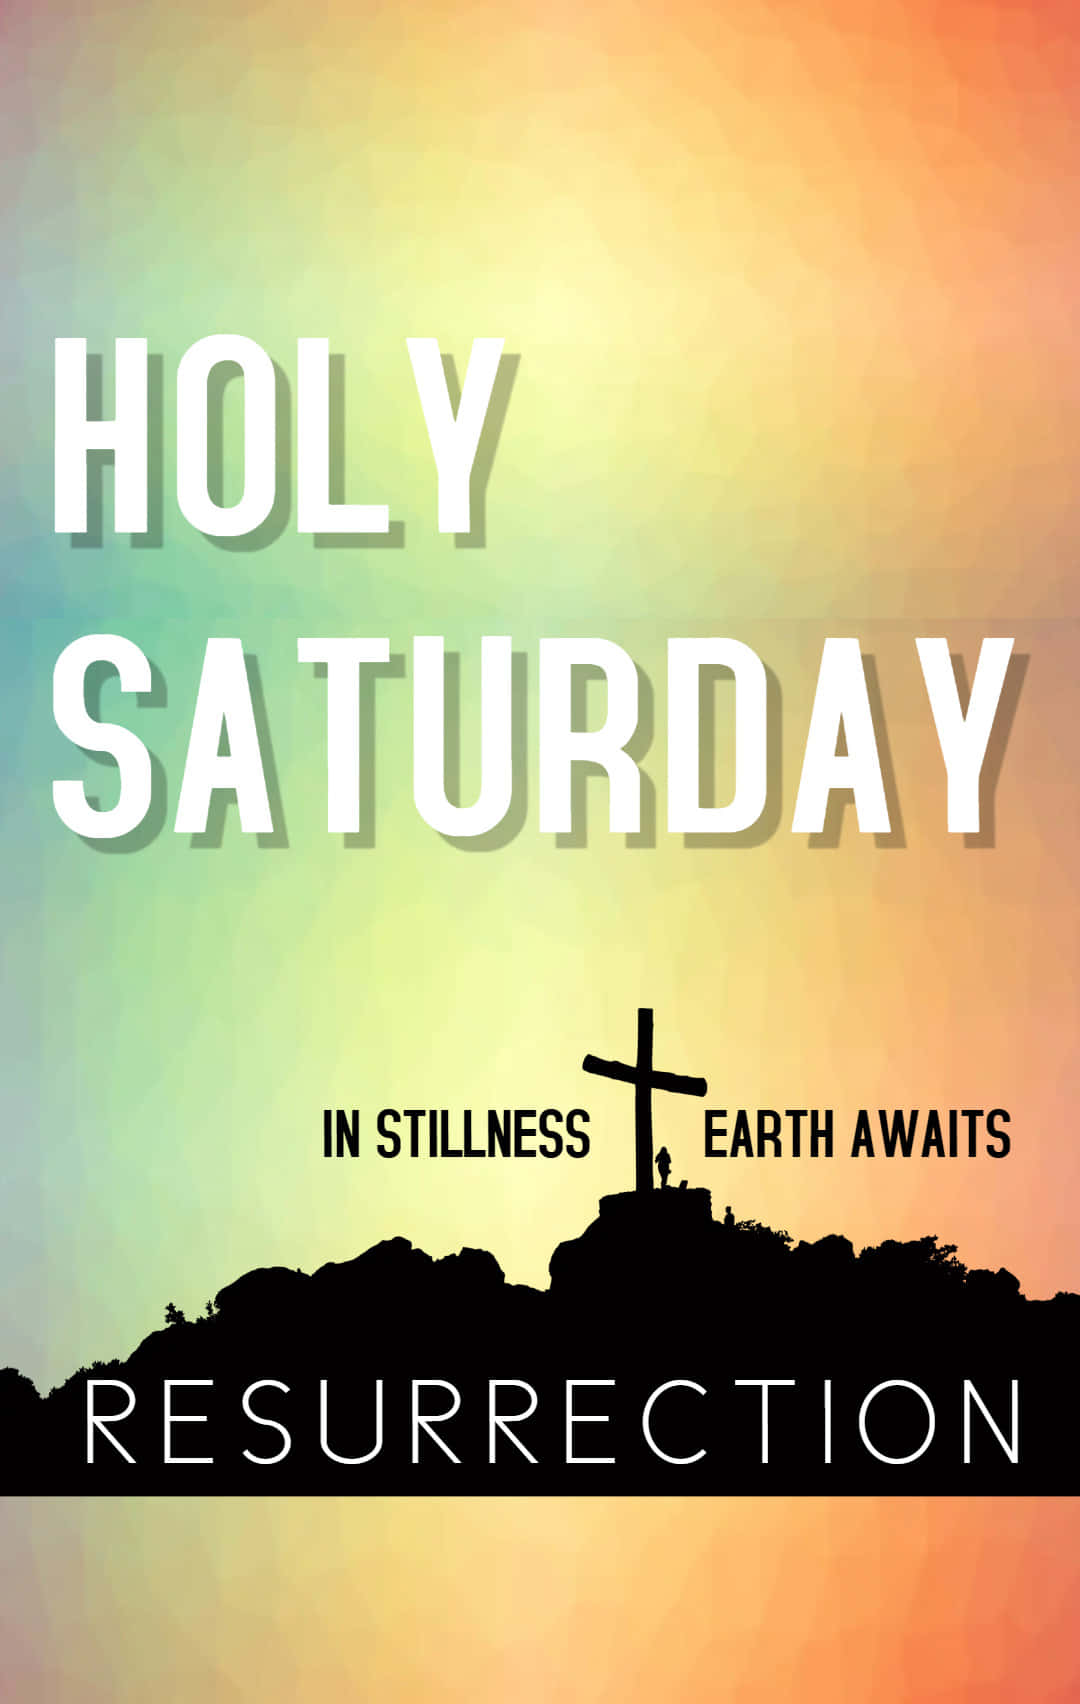 Download Gathering in Prayer on Holy Saturday Wallpaper ...